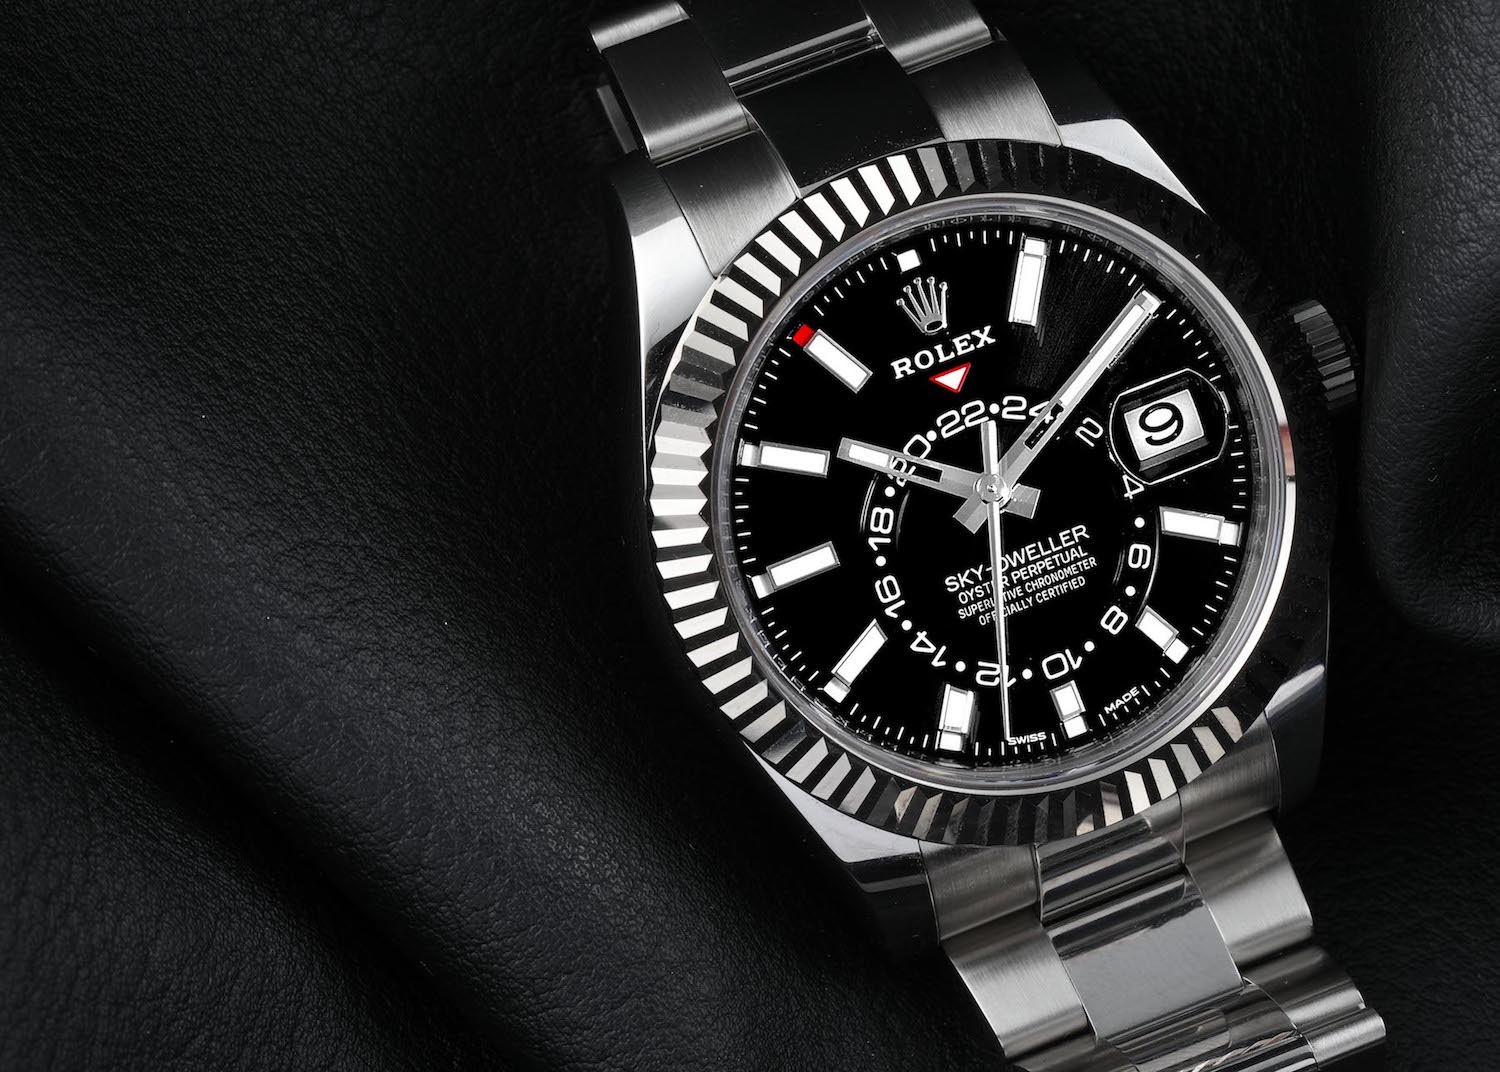 Large Rolex Watches | The Watch Club by 